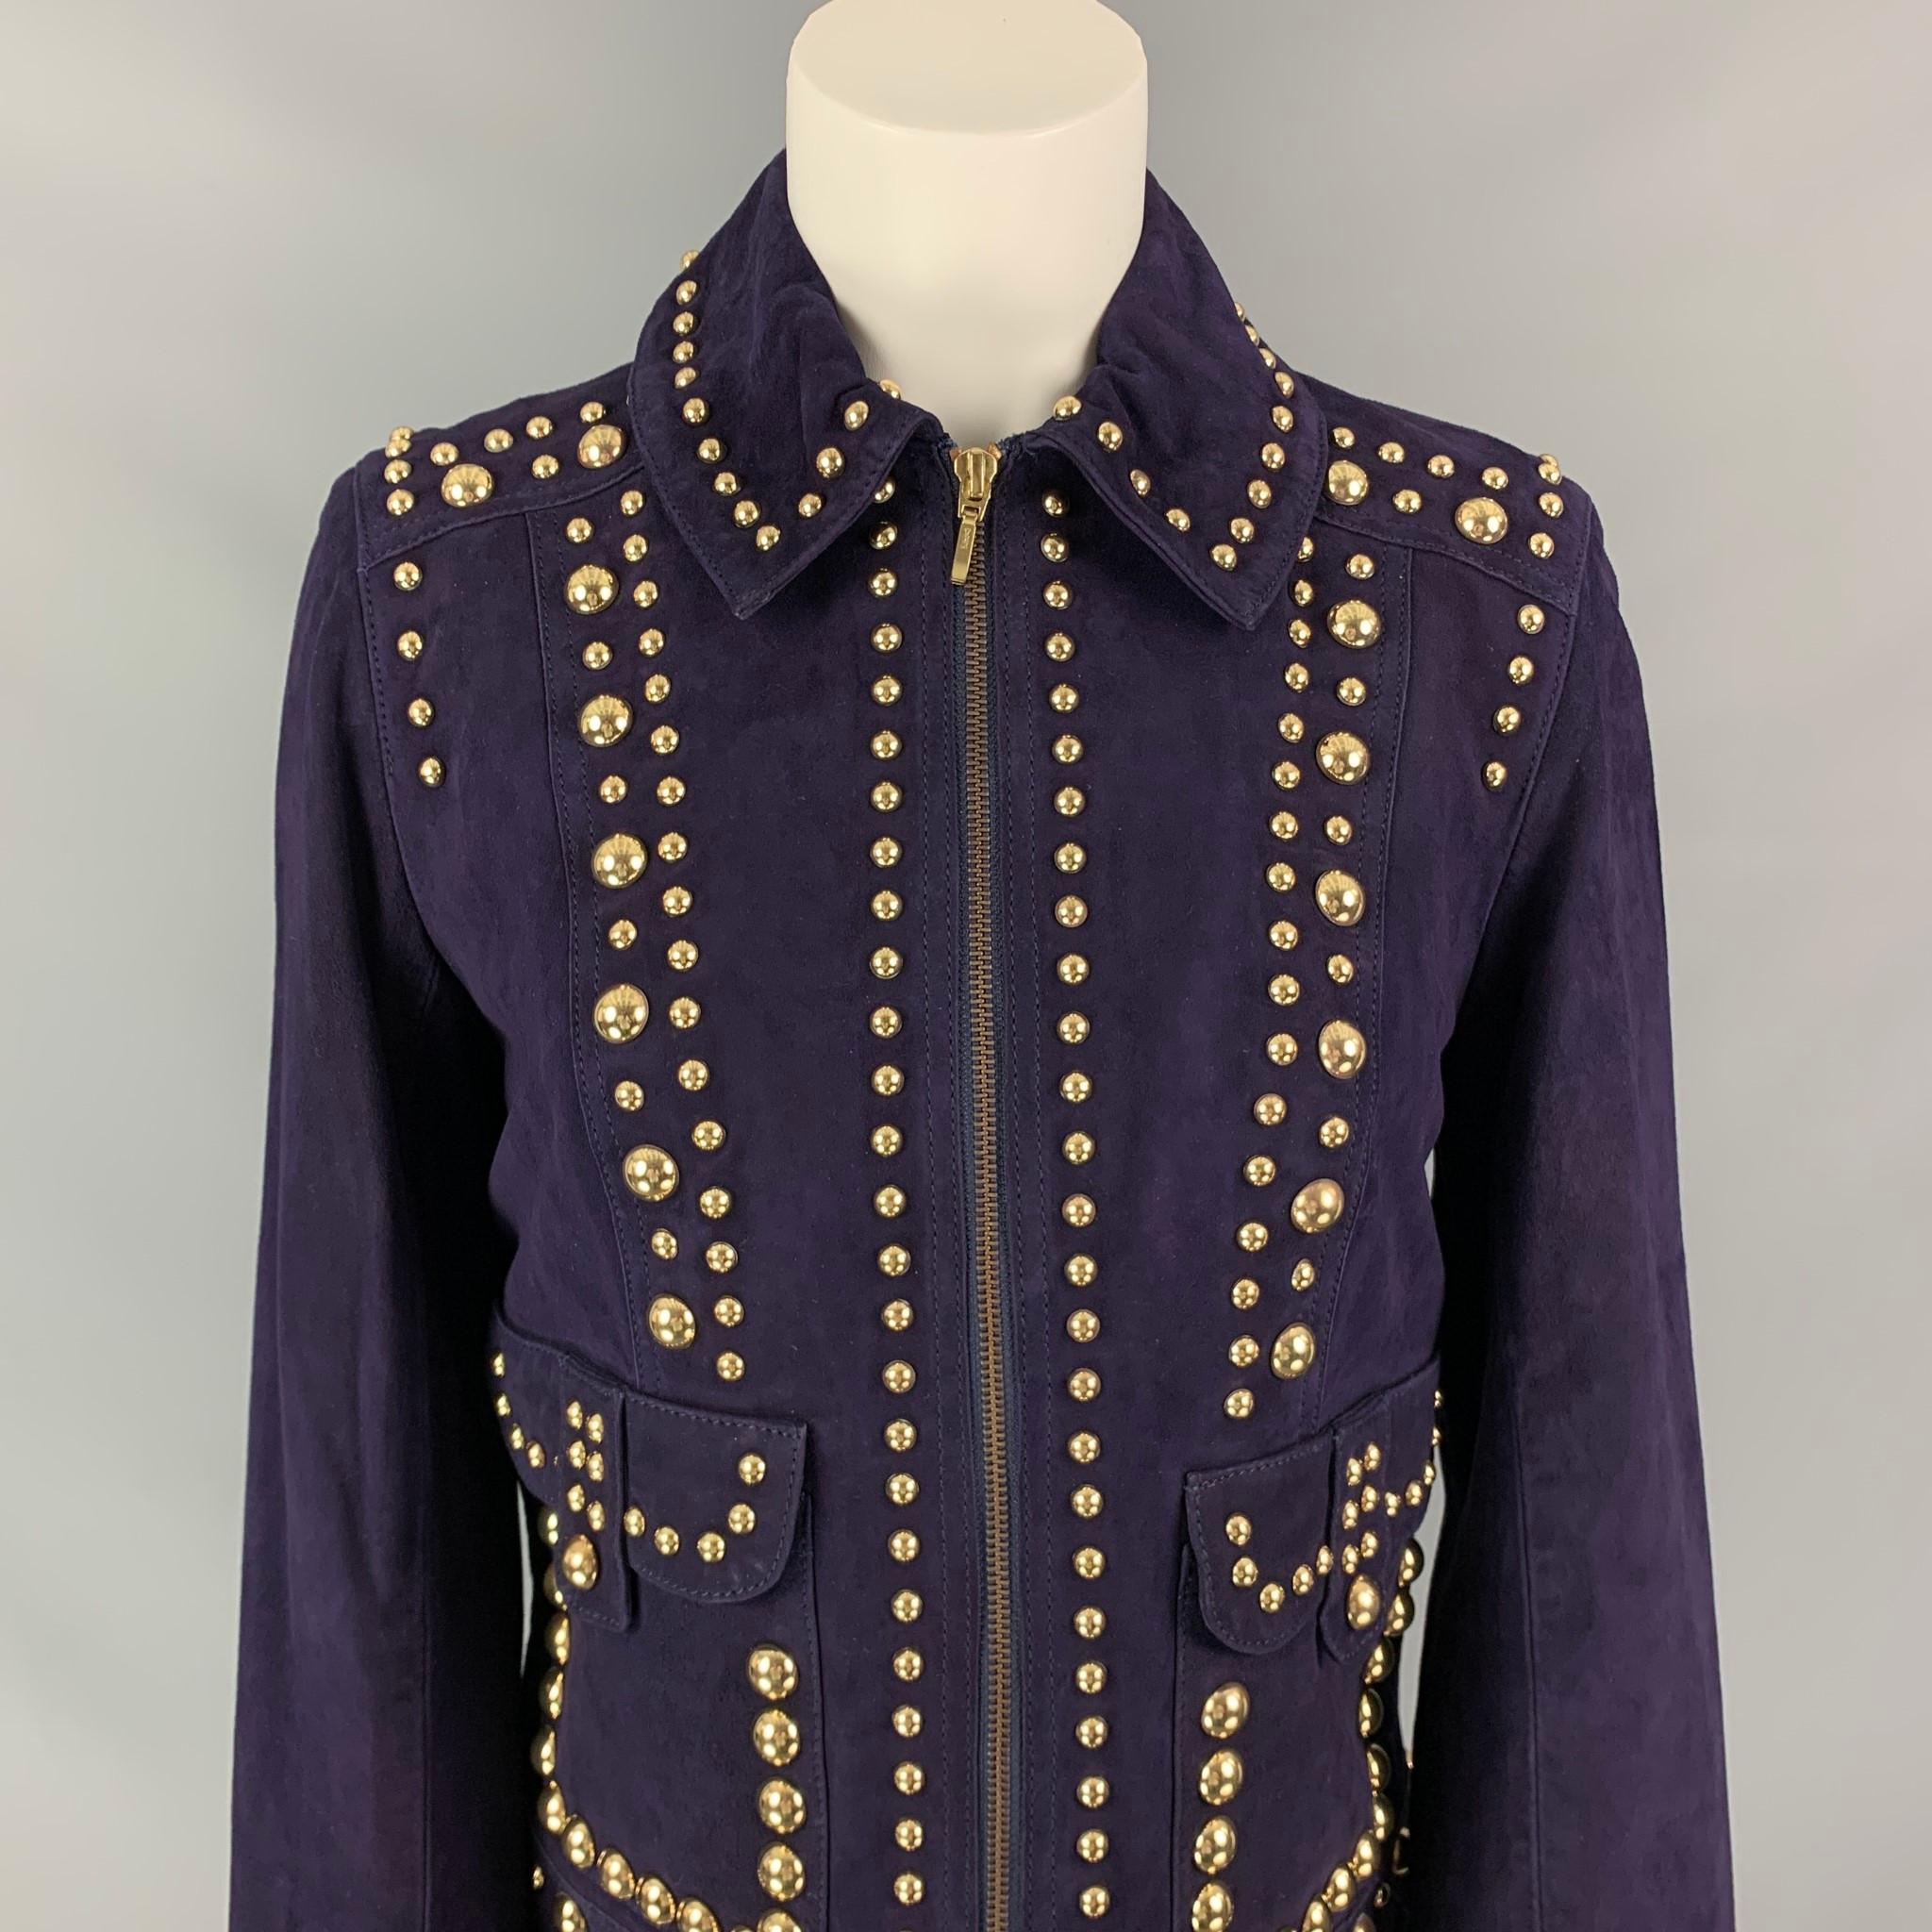 TRINA TURK jacket comes in a purple suede with gold tone studded details featuring a spread collar, front pockets, and a full zip up closure. 

New With Tags. 
Marked: S

Measurements:

Shoulder: 16 in.
Bust: 38 in.
Sleeve: 25 in.
Length: 22.5 in. 